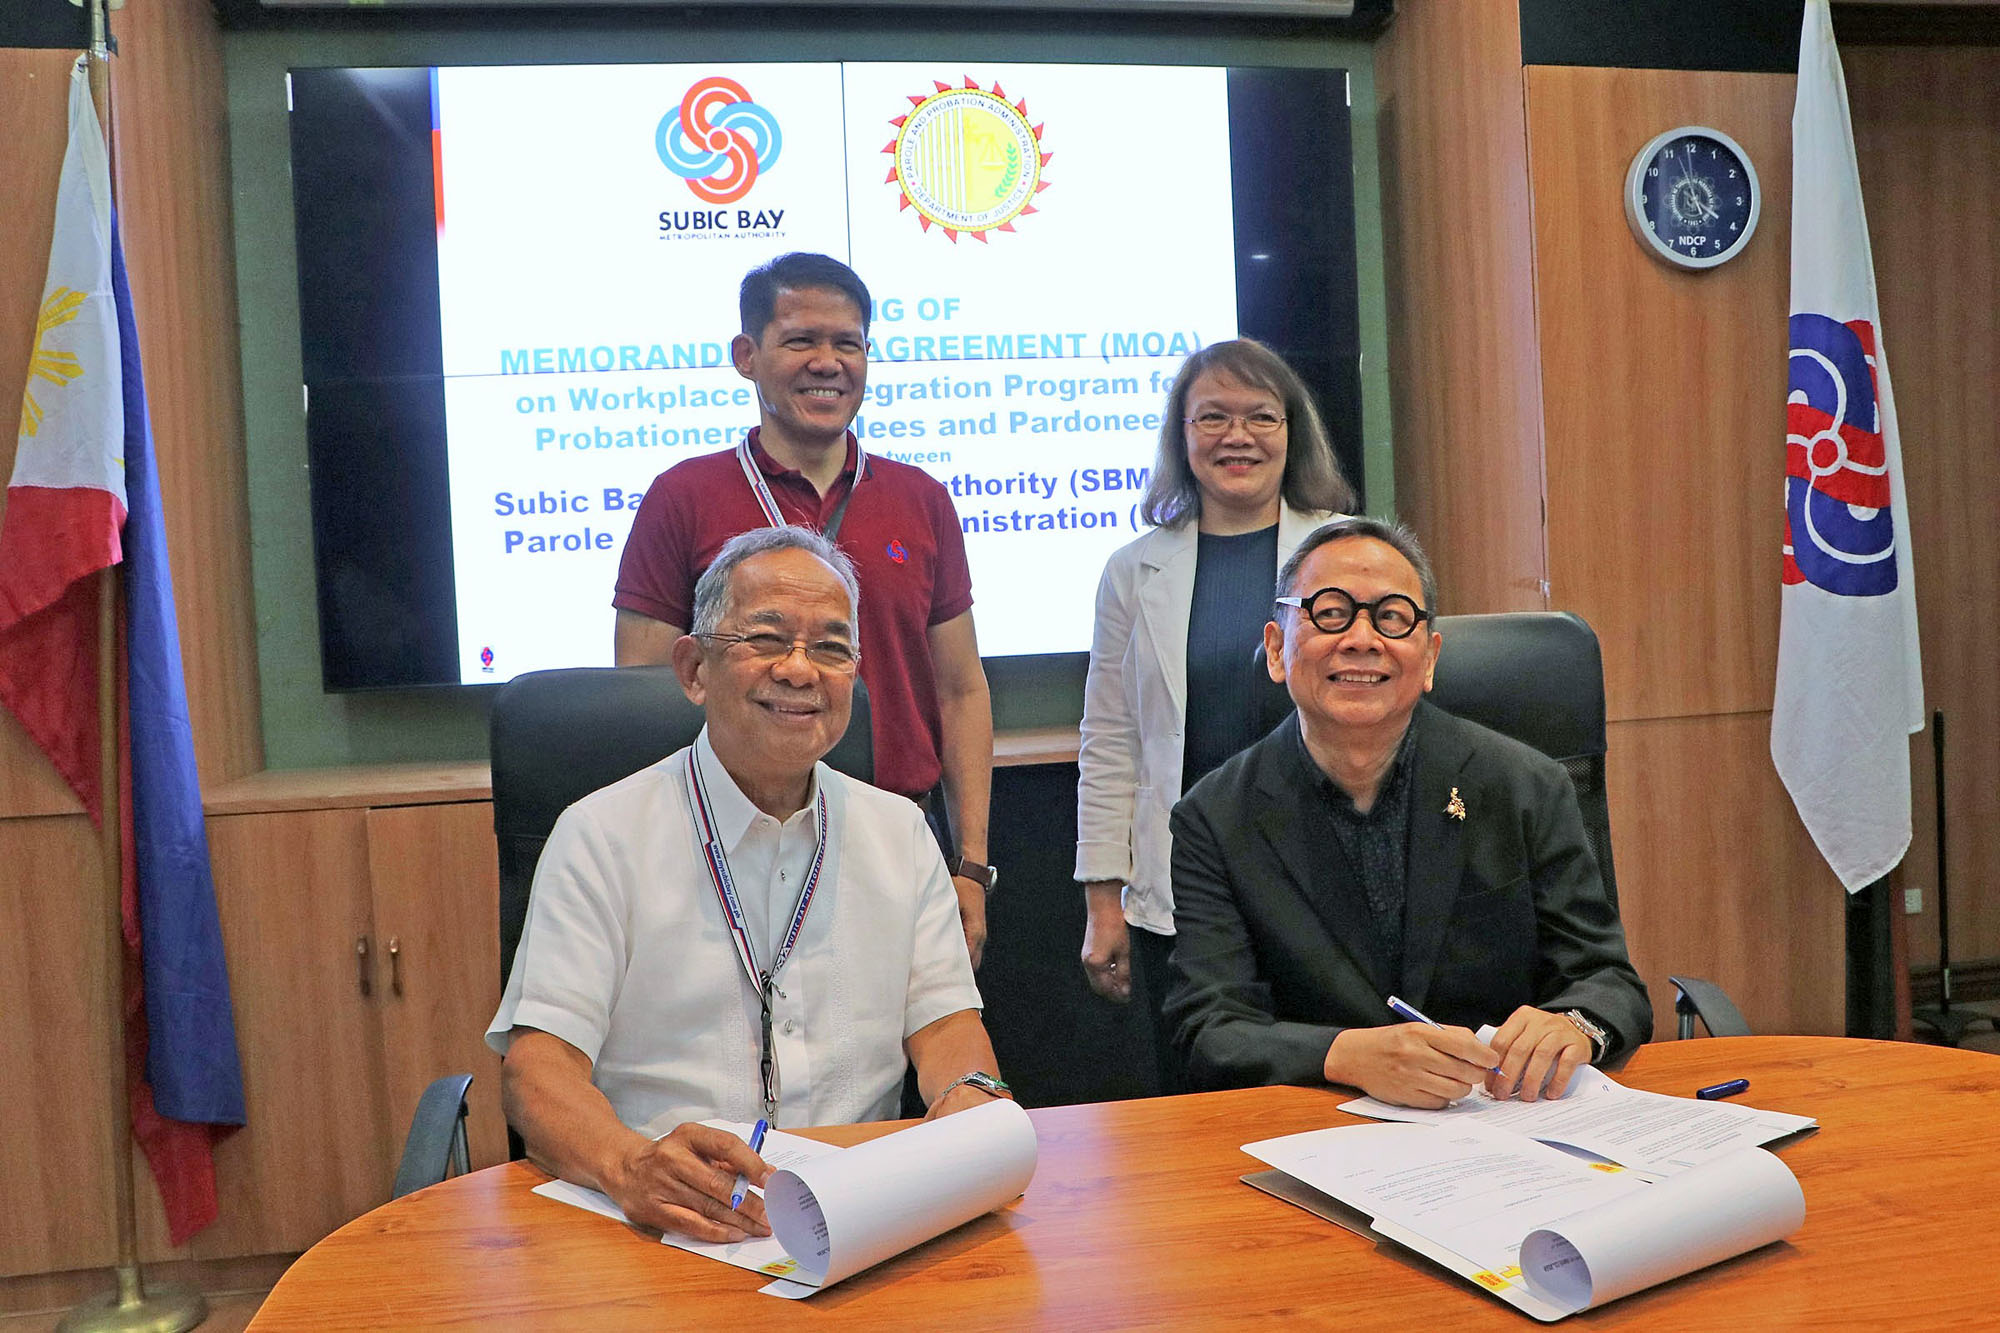 Subic Bay Metropolitan Authority (SBMA) Chairman and Administrator Eduardo Jose L. Aliño (seated, left) and Department of Justice-Parole and Probation Administration (DOJ-PPA) Administrator Atty. Bienvenido O. Benitez, Jr. sign the Memorandum of Agreement (MOA) for the workplace reintegration program for probationers, parolees and pardonees, held at the SBMA Corporate Boardroom on Thursday, April 11. Joining them are SBMA Senior Deputy Administrator for Support Services Atty. Ramon O. Agregado and DOJ-PPA Director Marissa DC Alquetra.